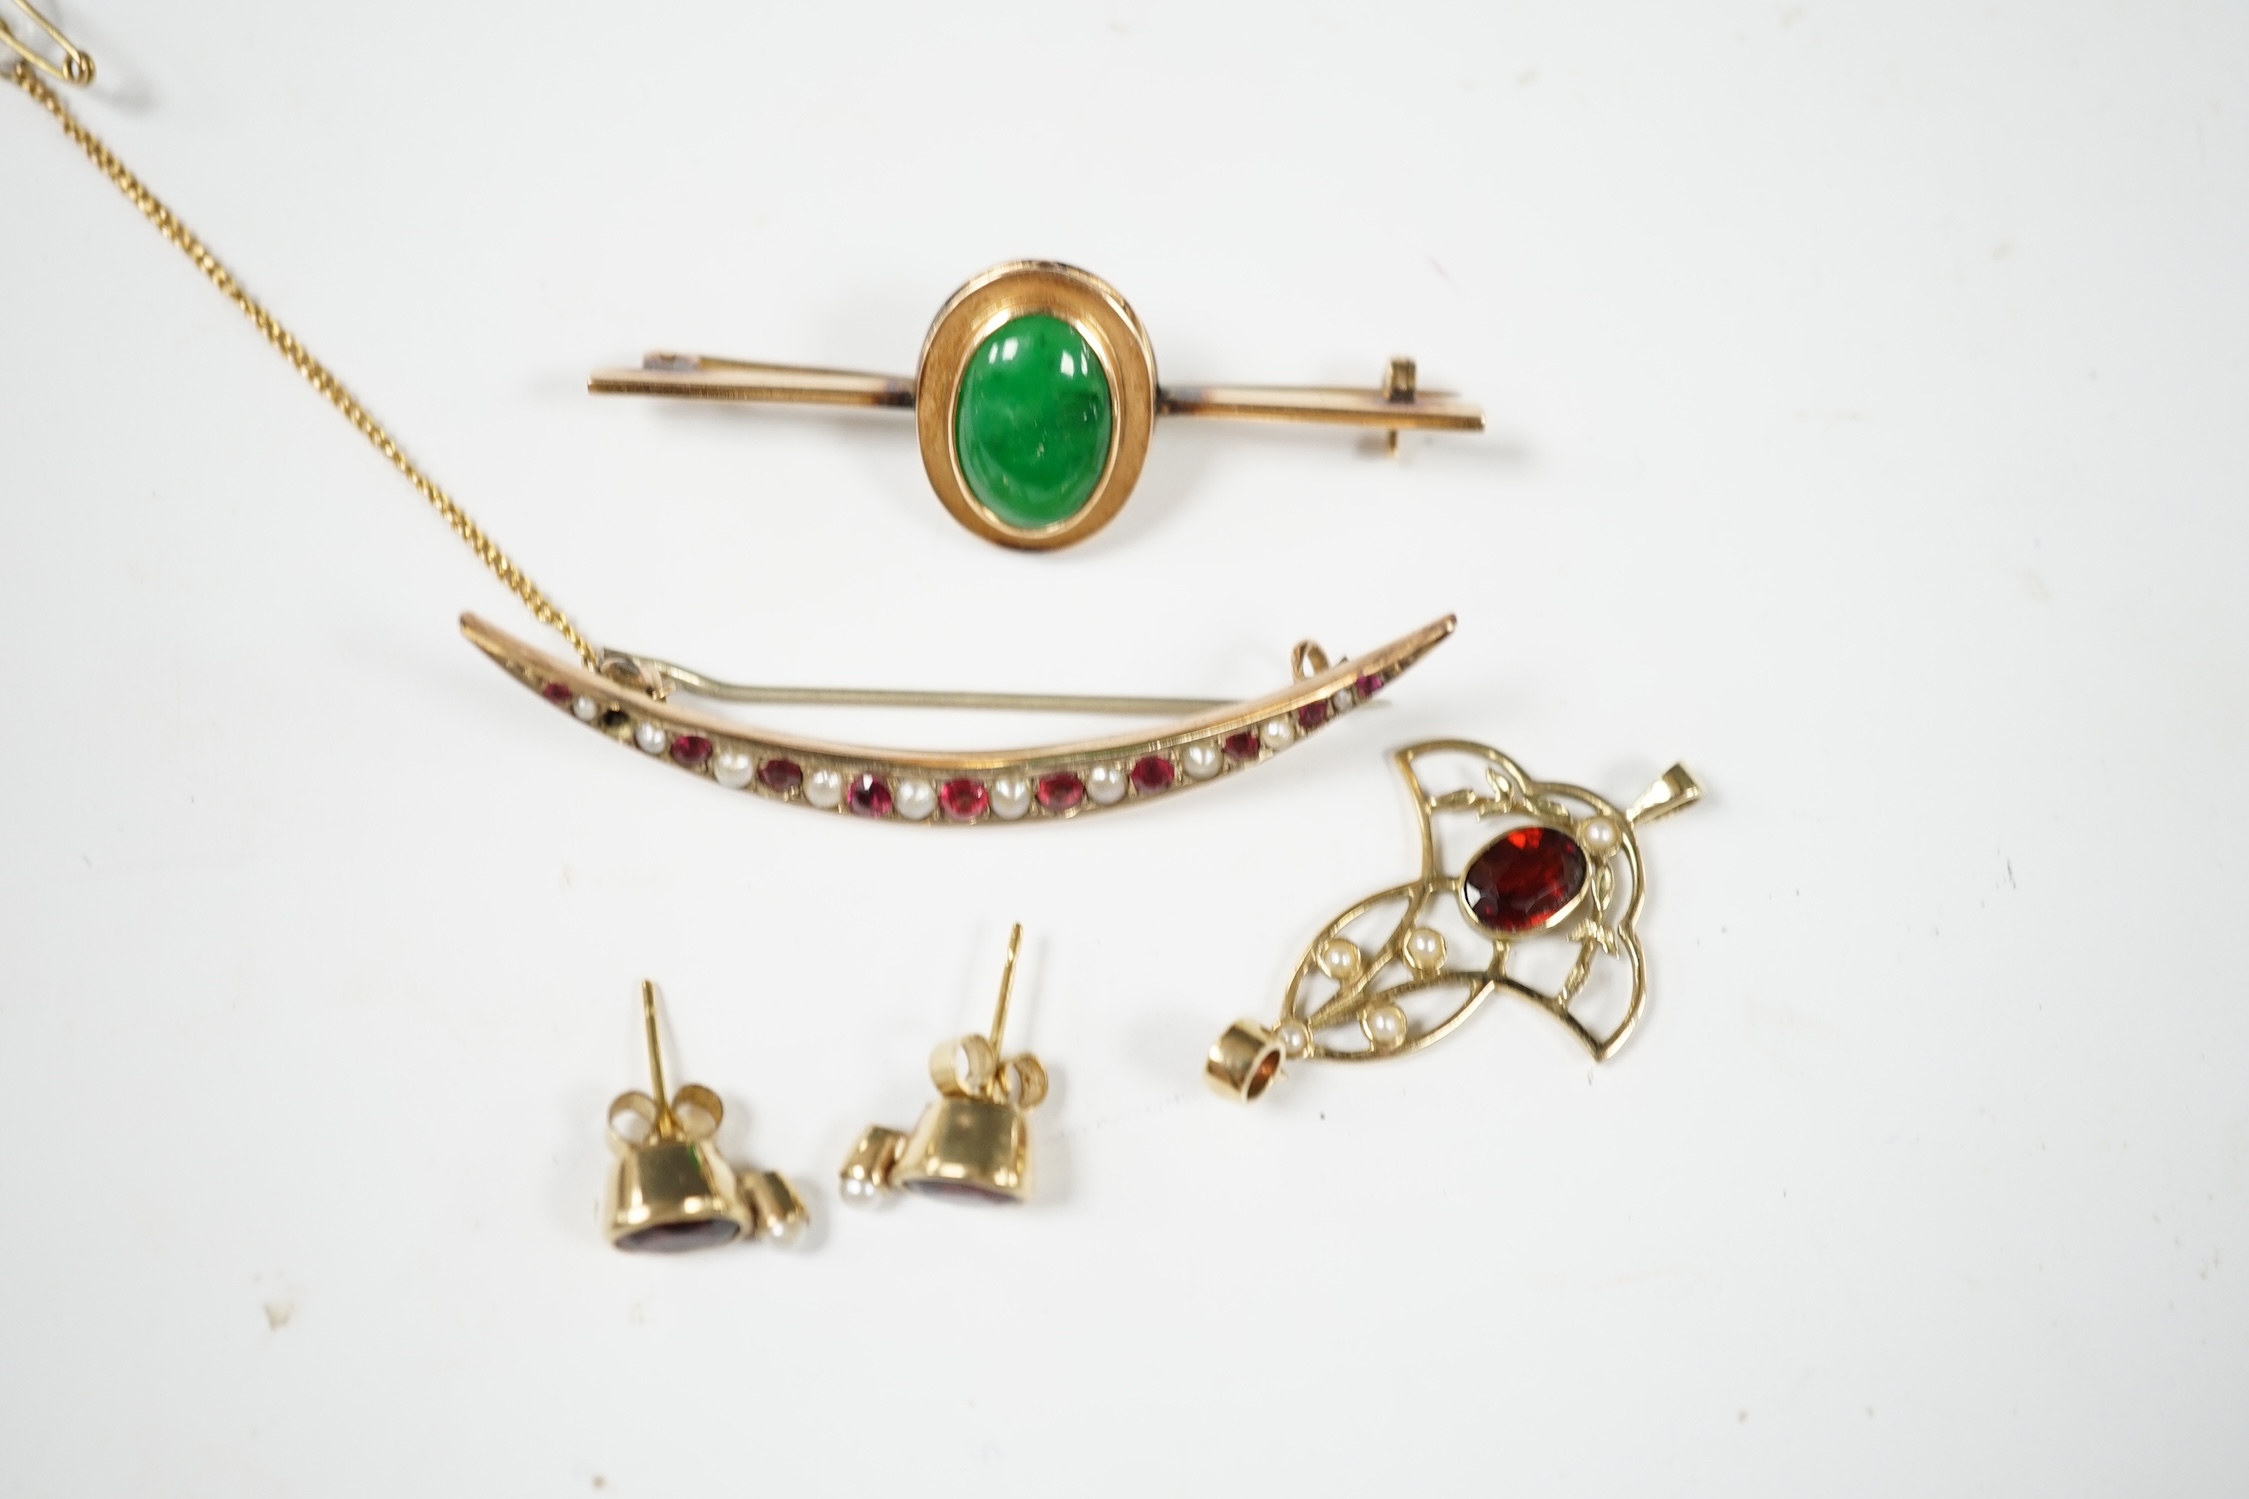 Sundry jewellery including a 9ct and gem set crescent brooch, 51mm, a 9ct, garnet and seed pearl set pendant, a 14ct and jade set bar brooch and a pair of gem set ear studs. Condition - fair to good